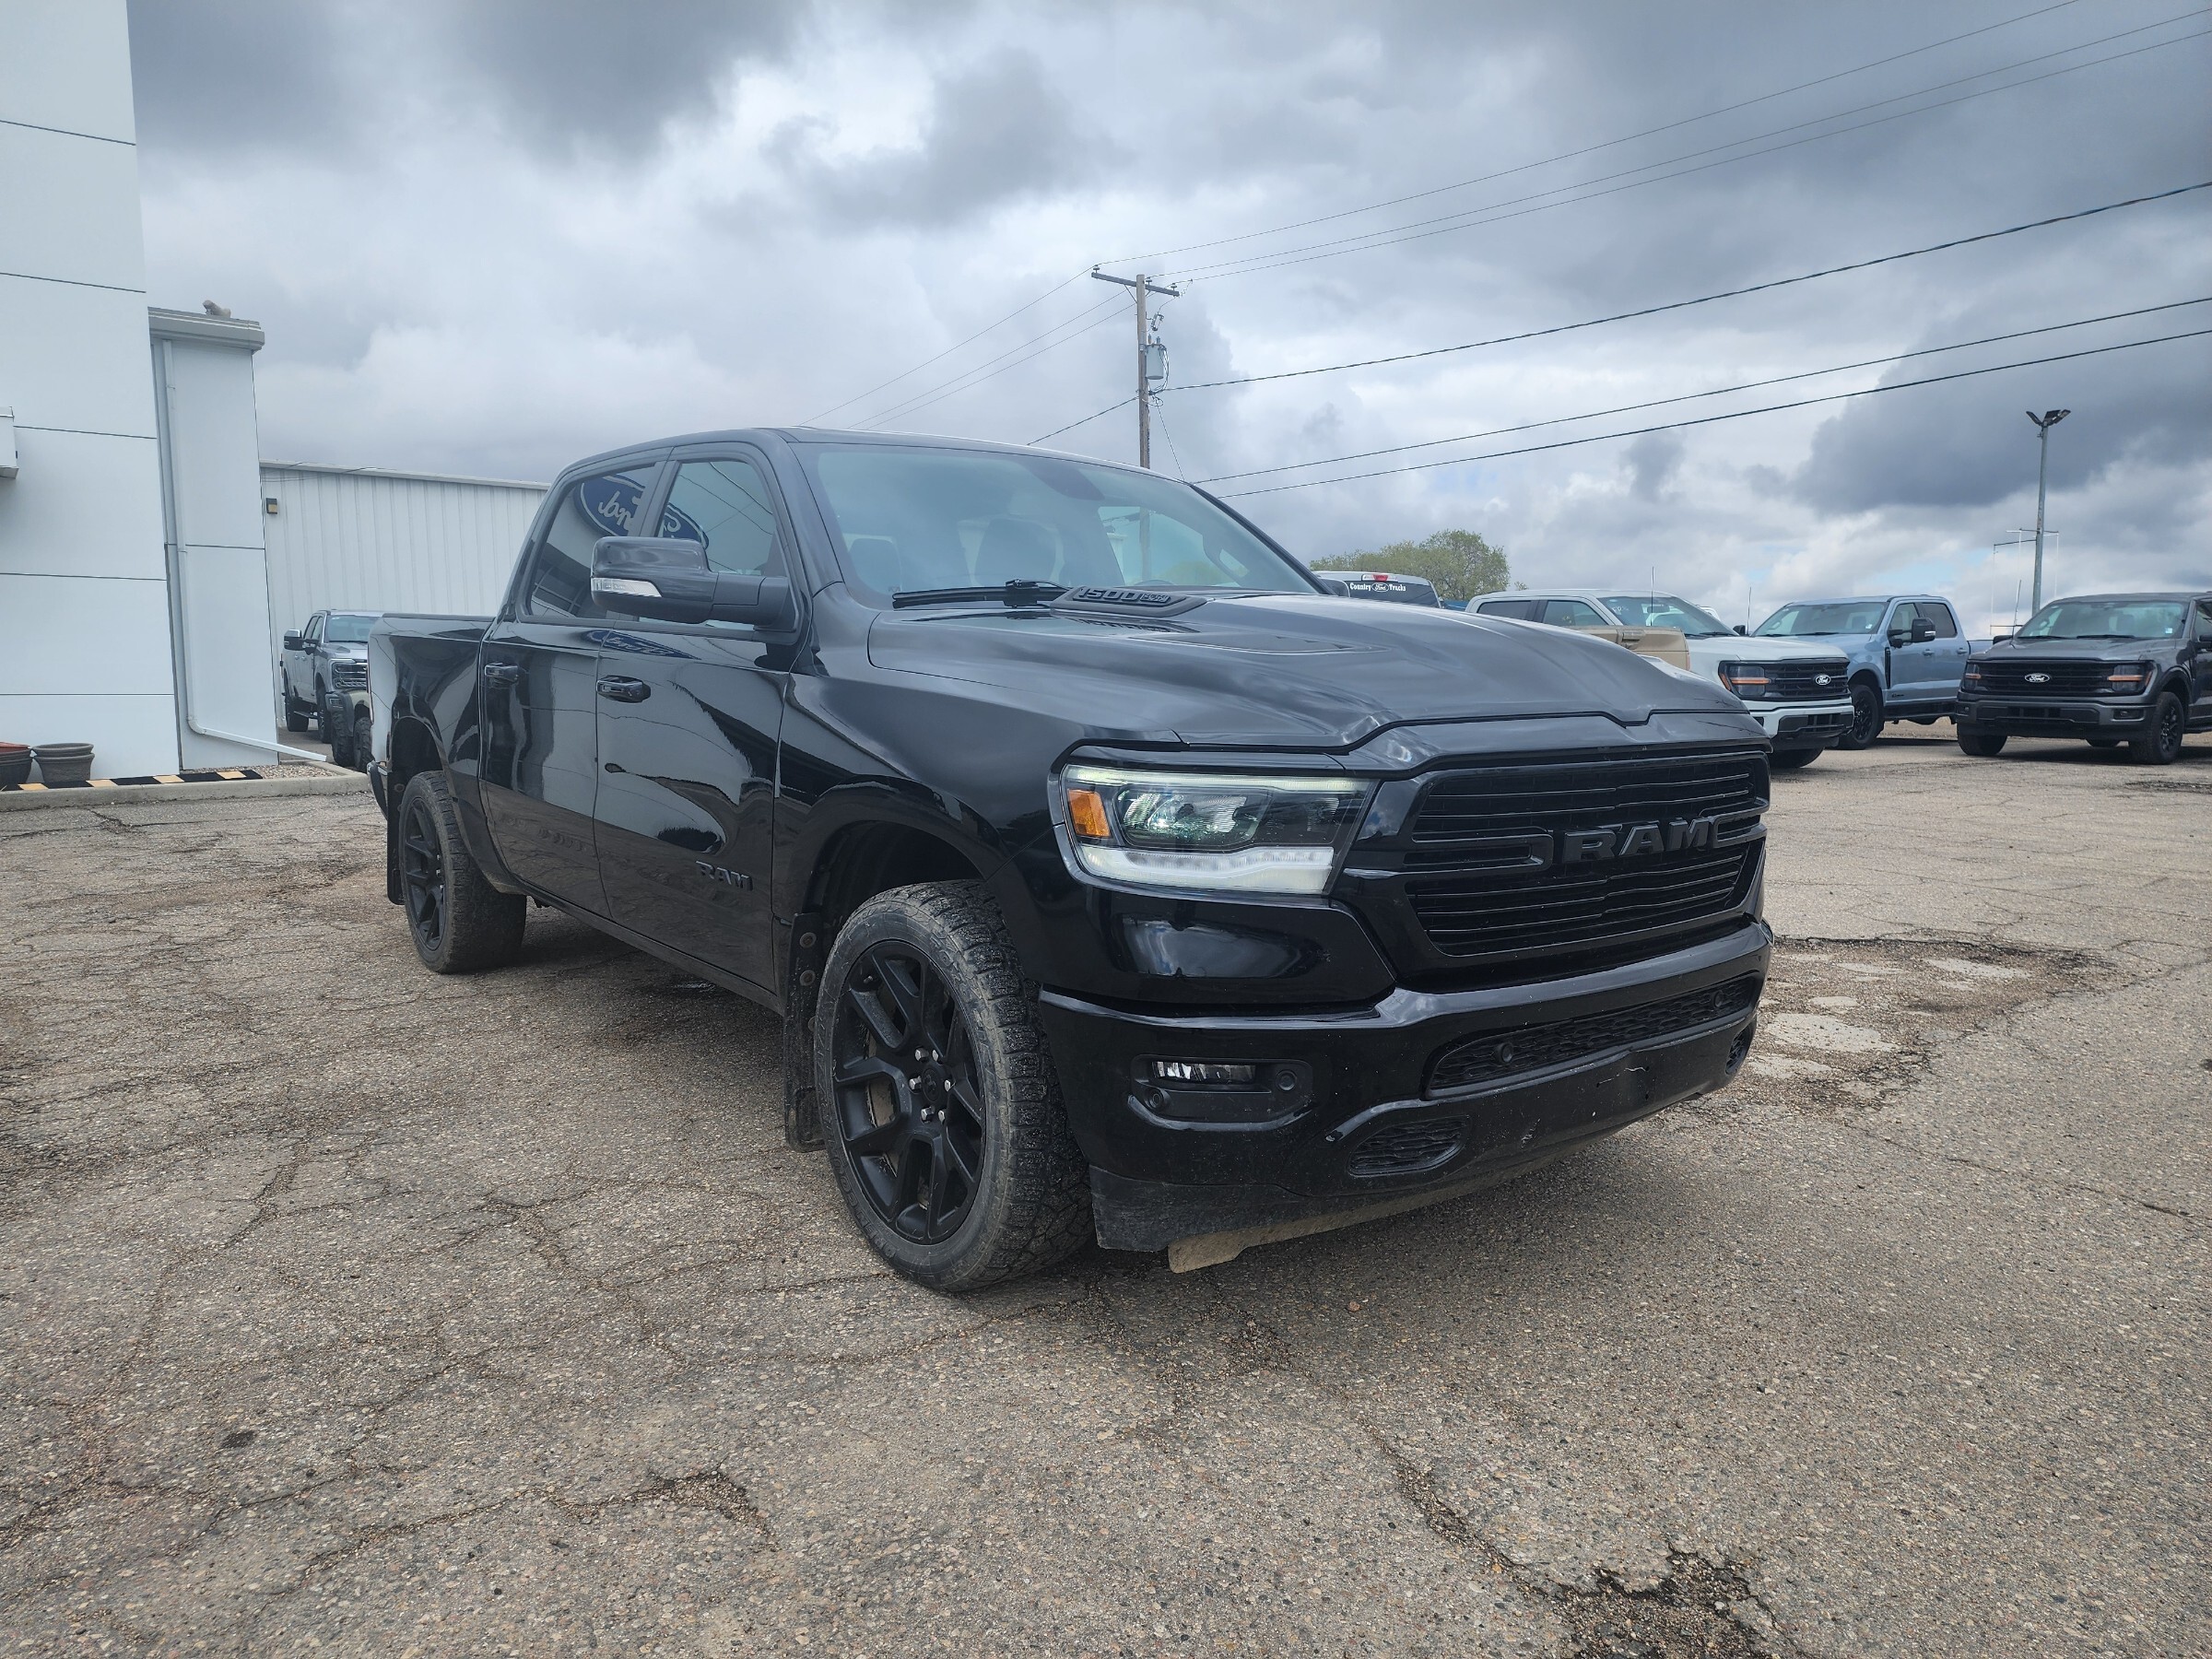 2020 Ram 1500 Rebel TOW PACKAGE | HEATED SEATS | REMOTE START